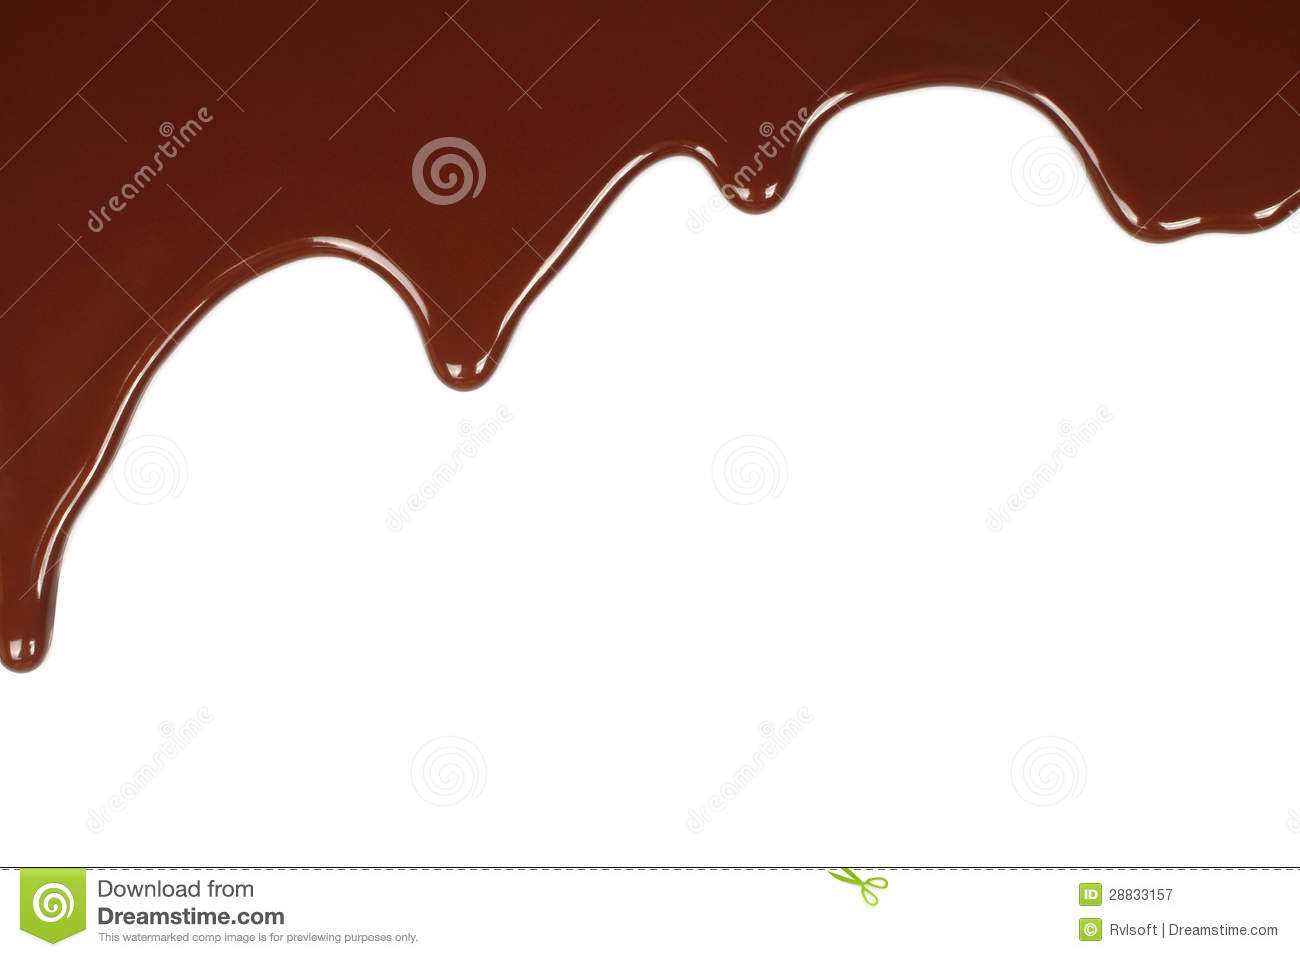 Melted Chocolate Dripping Royalty Free Stock Photography   Image